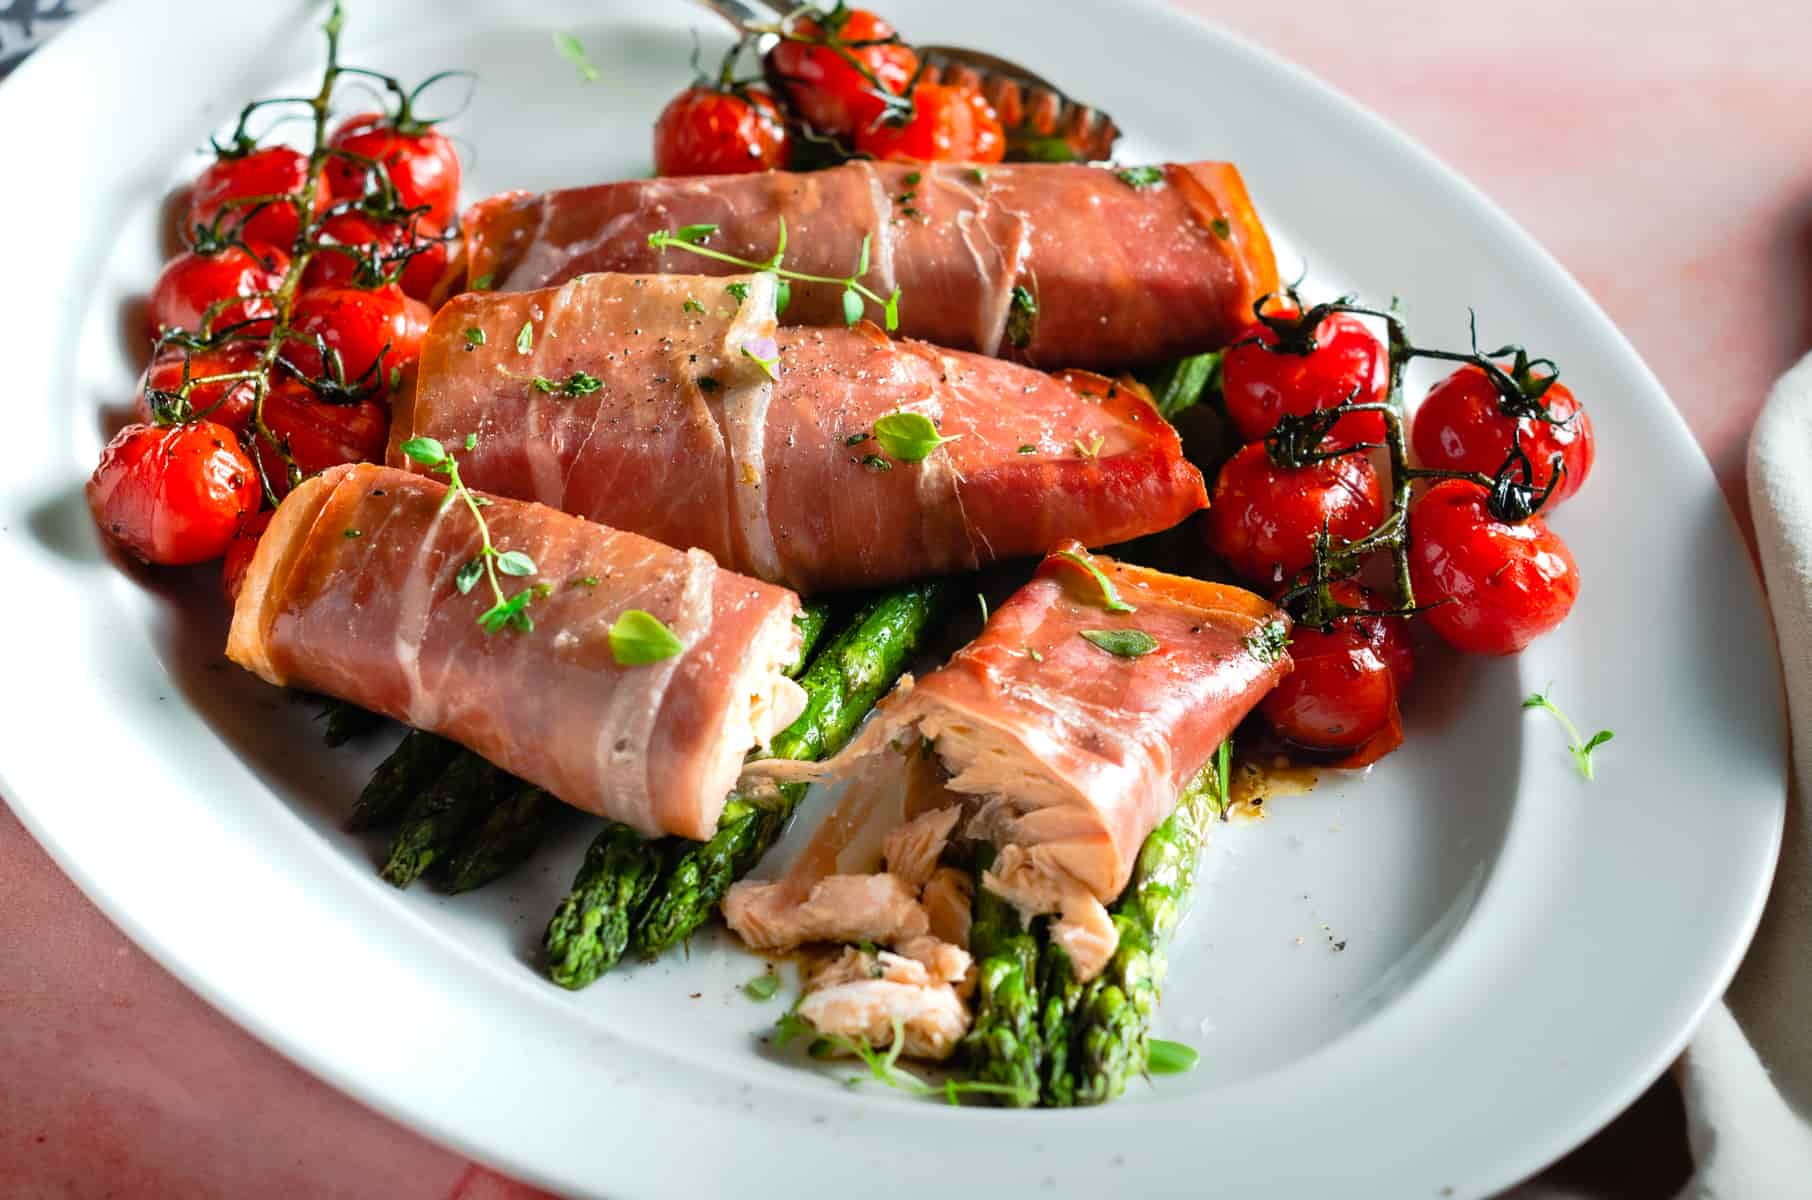 oven baked with Parma ham - Food